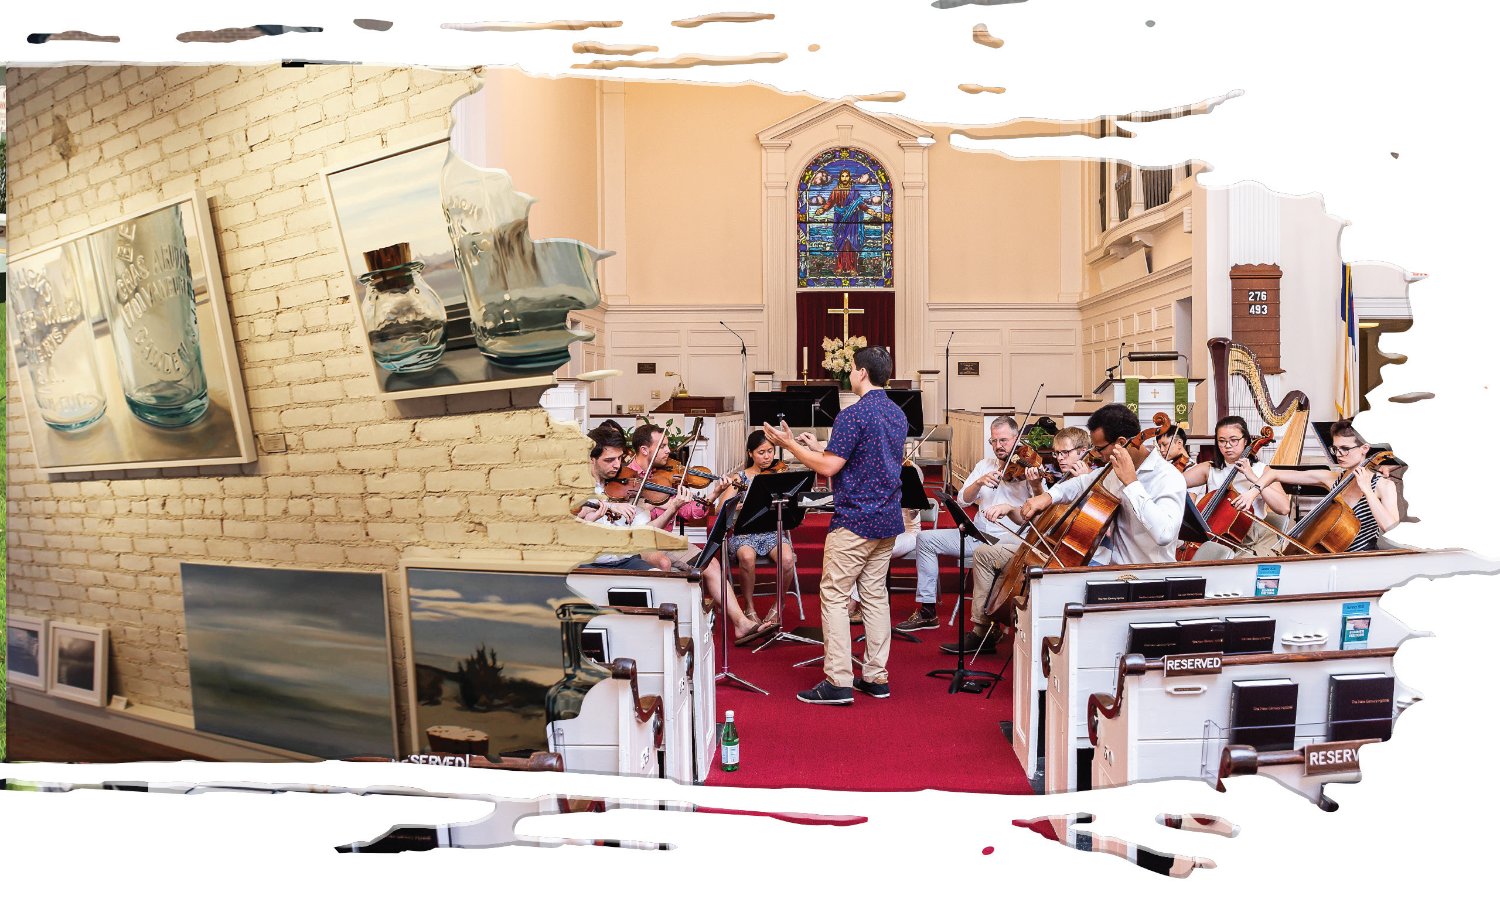 Composite image of Nines Art Gallery and Pilgrim Congregational Church choir rehearsal